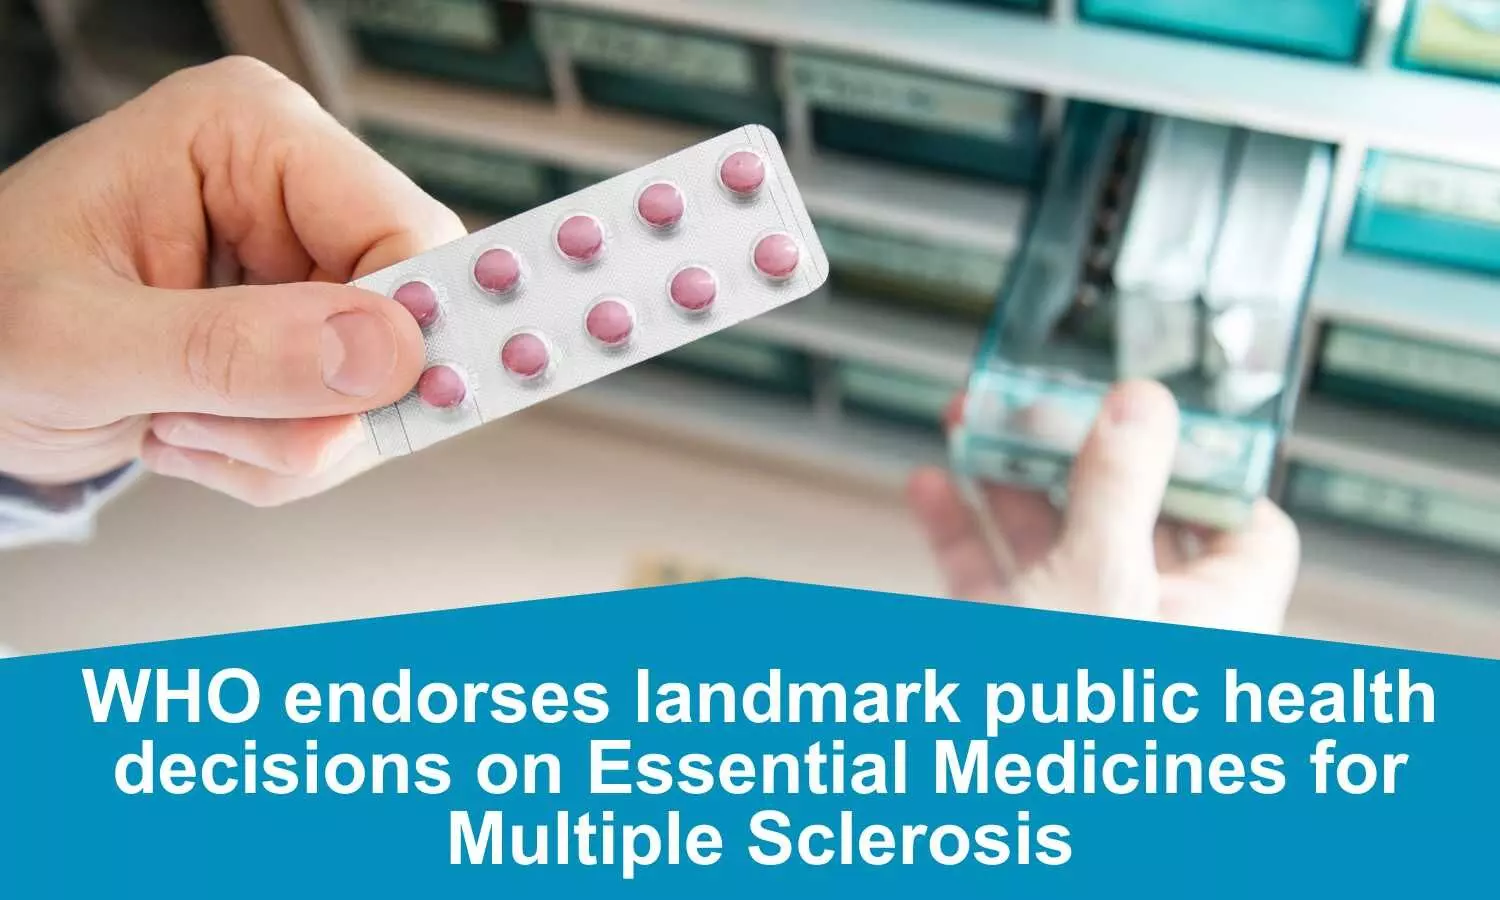 WHO endorses landmark public health decisions on Essential Medicines for Multiple Sclerosis